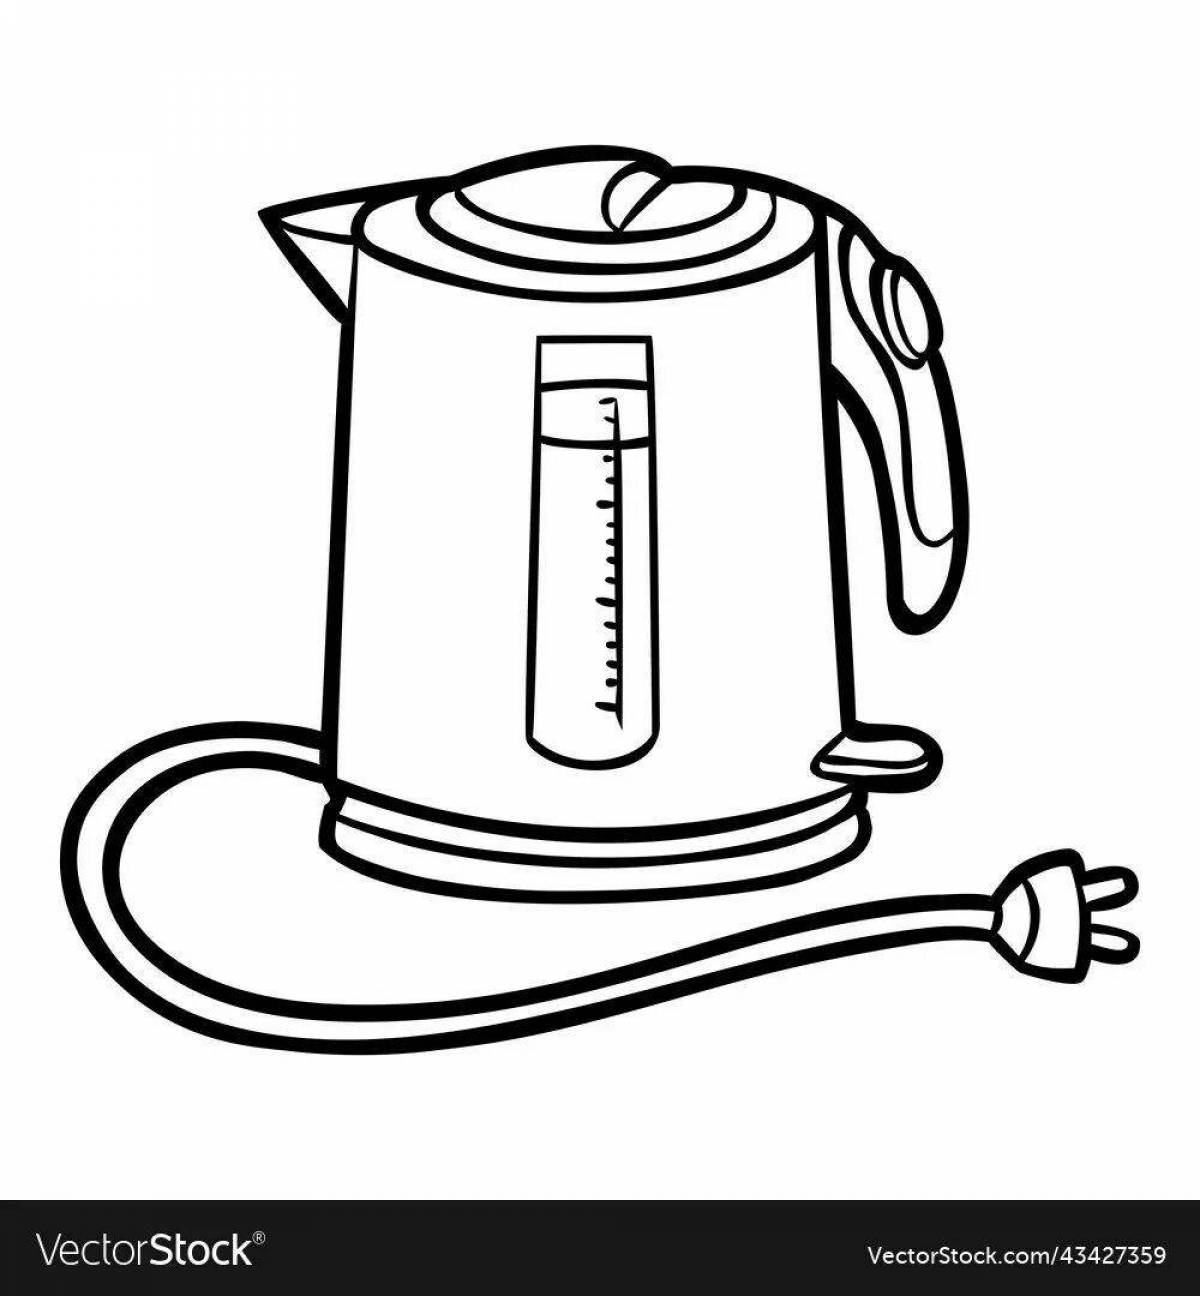 Coloring electric kettle for children